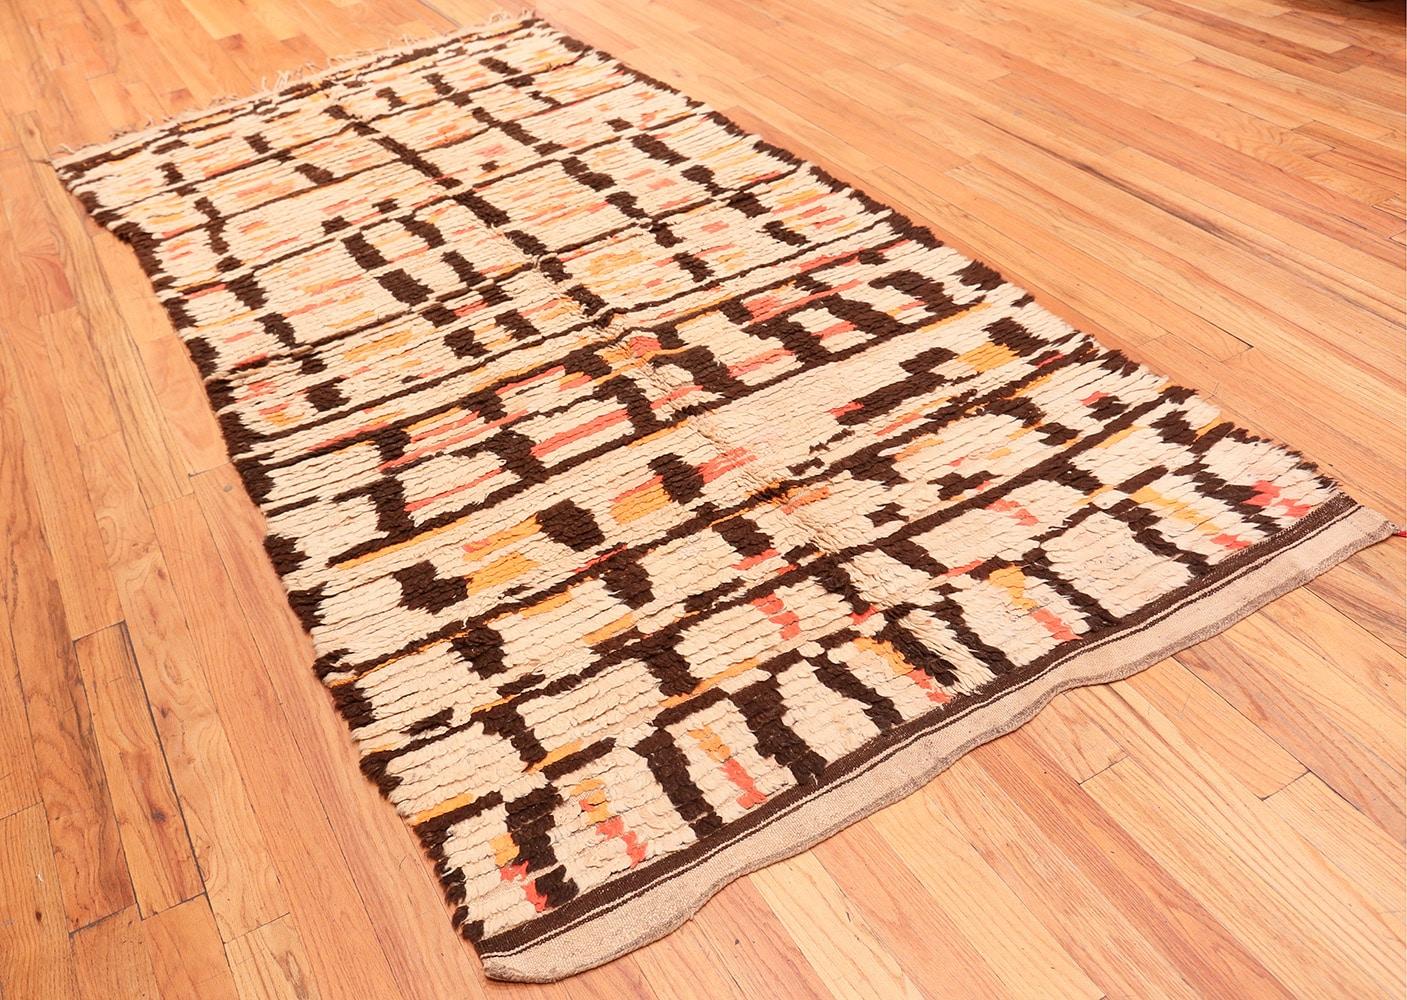 Hand-Knotted Vintage Moroccan Rug. Size: 4 ft 8 in x 9 ft 2 in (1.42 m x 2.79 m)